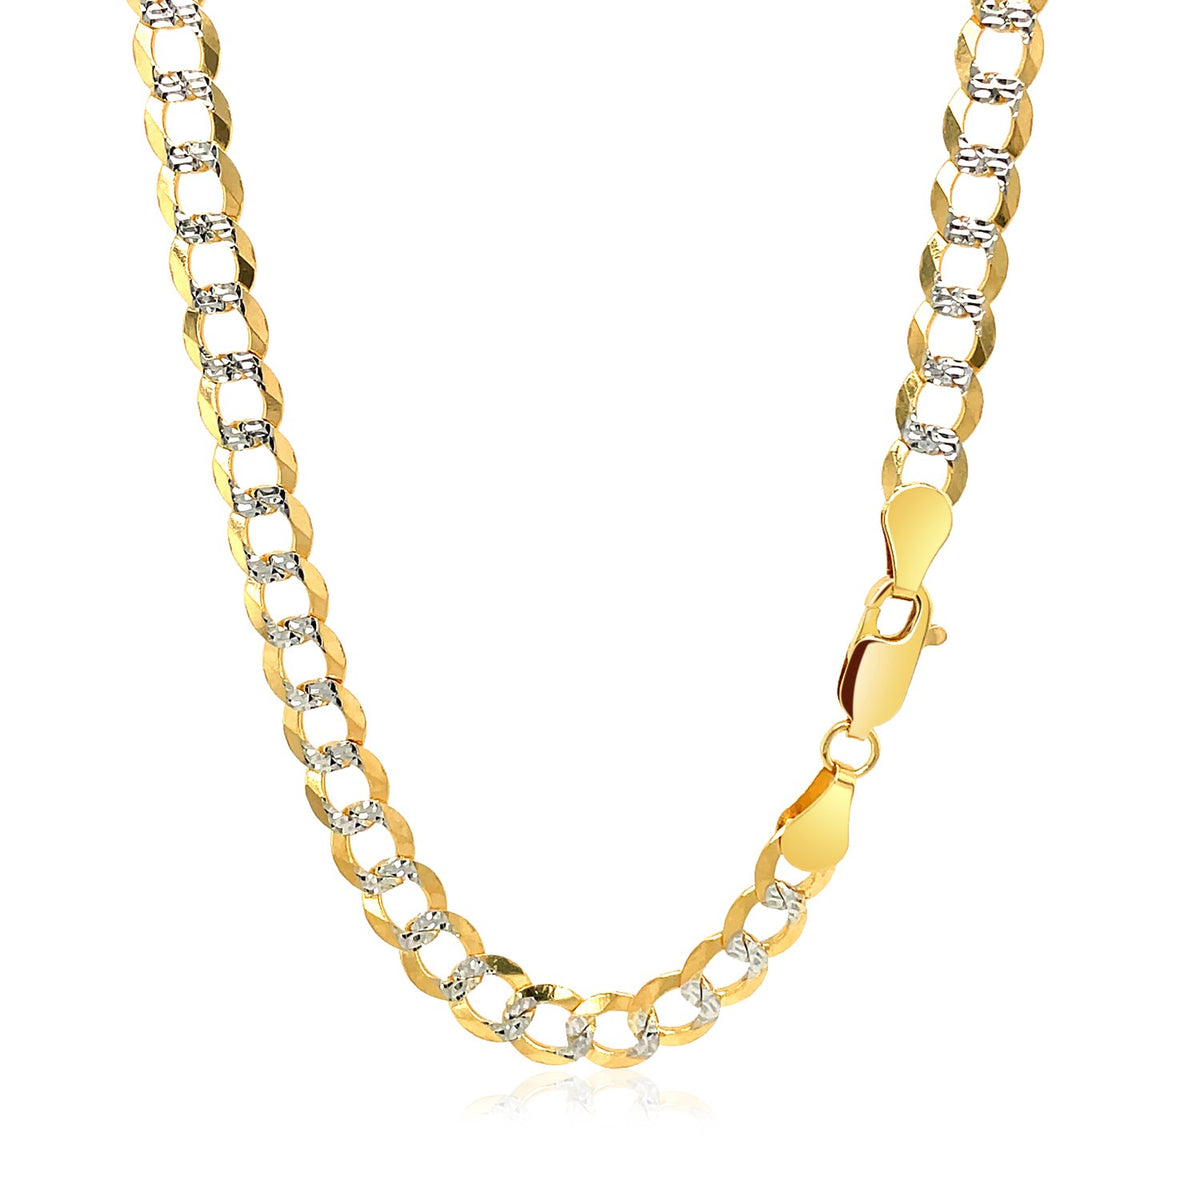 Pave Curb Chain - 14k Two Tone Gold 5.70mm